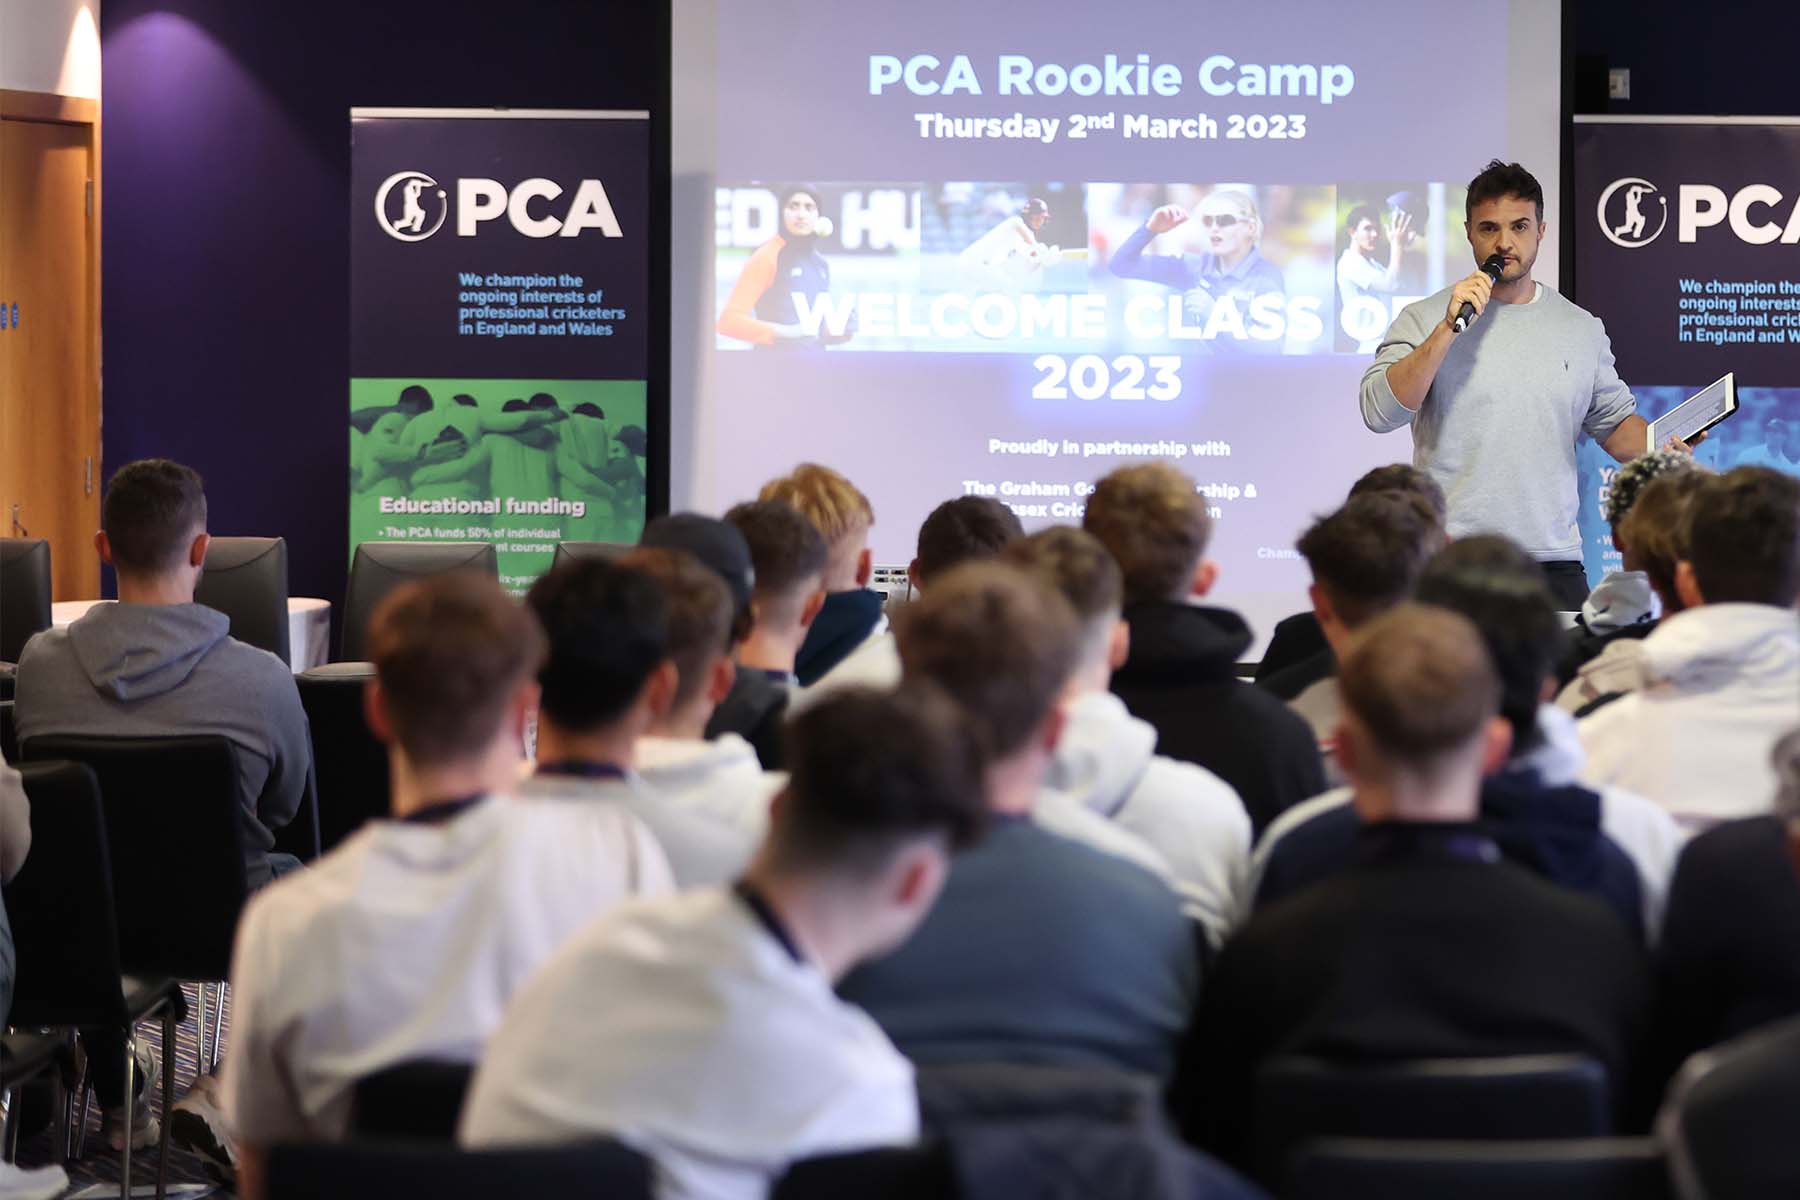 Record Rookie Camp sets standards